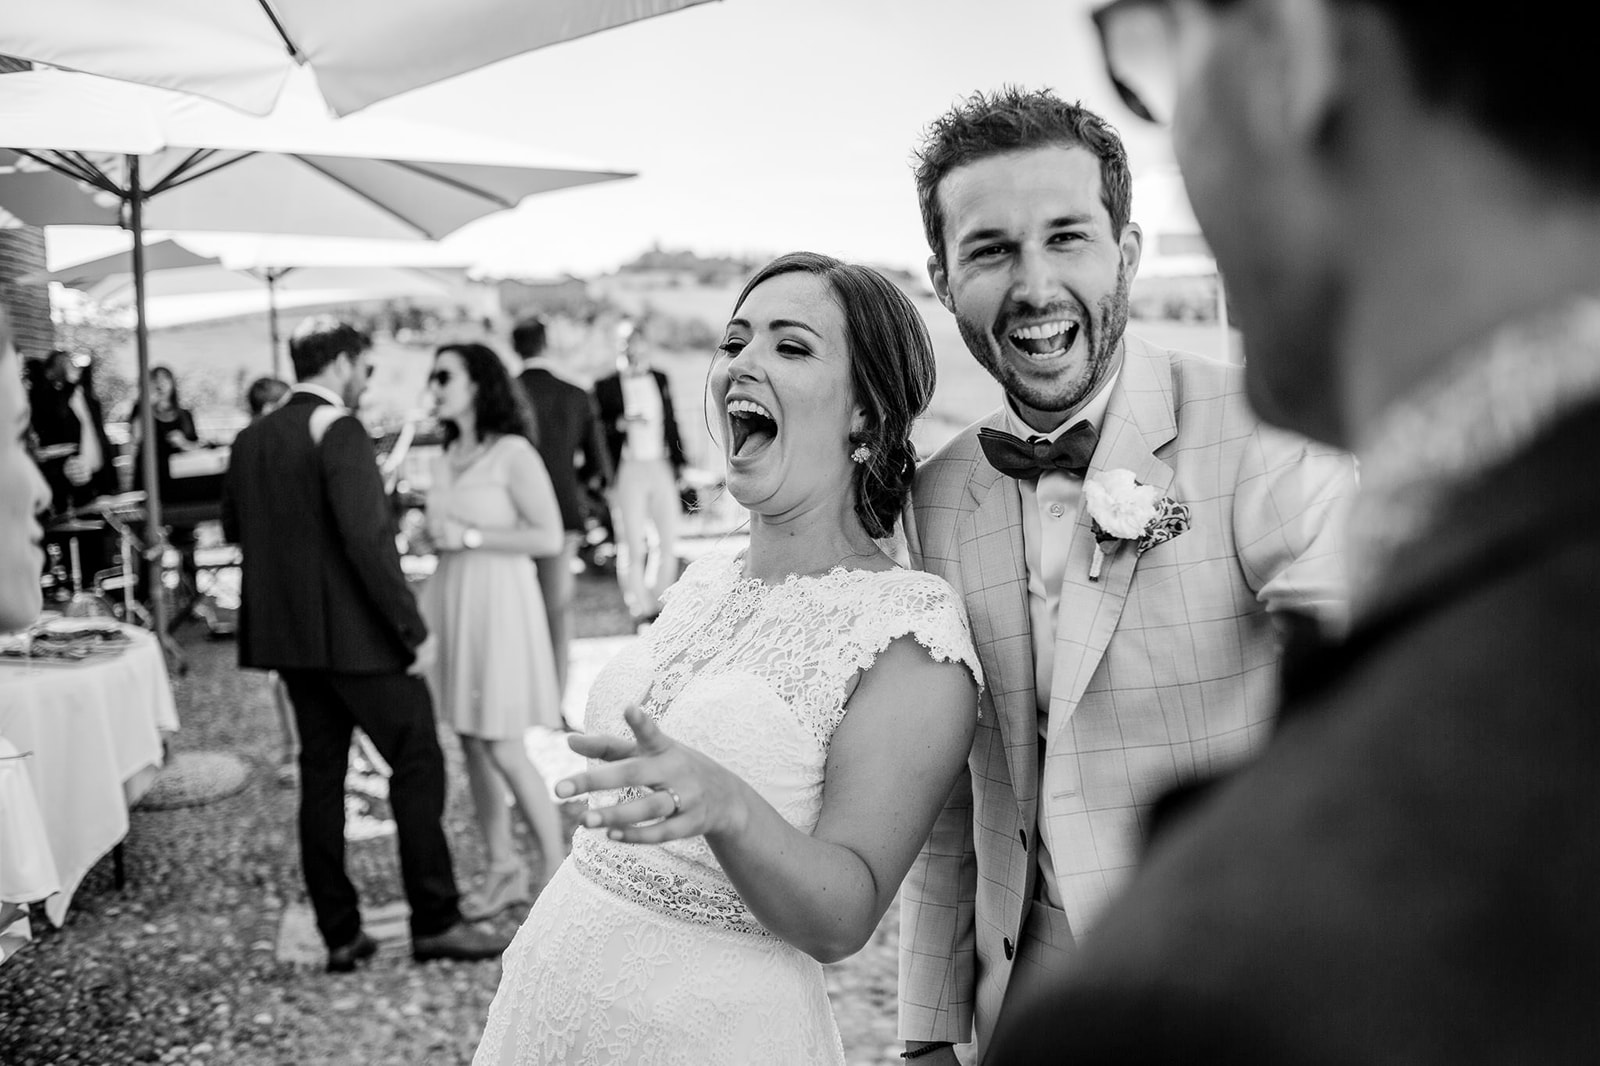 Groom and Bride having fun together during the aperitif in Monferrato